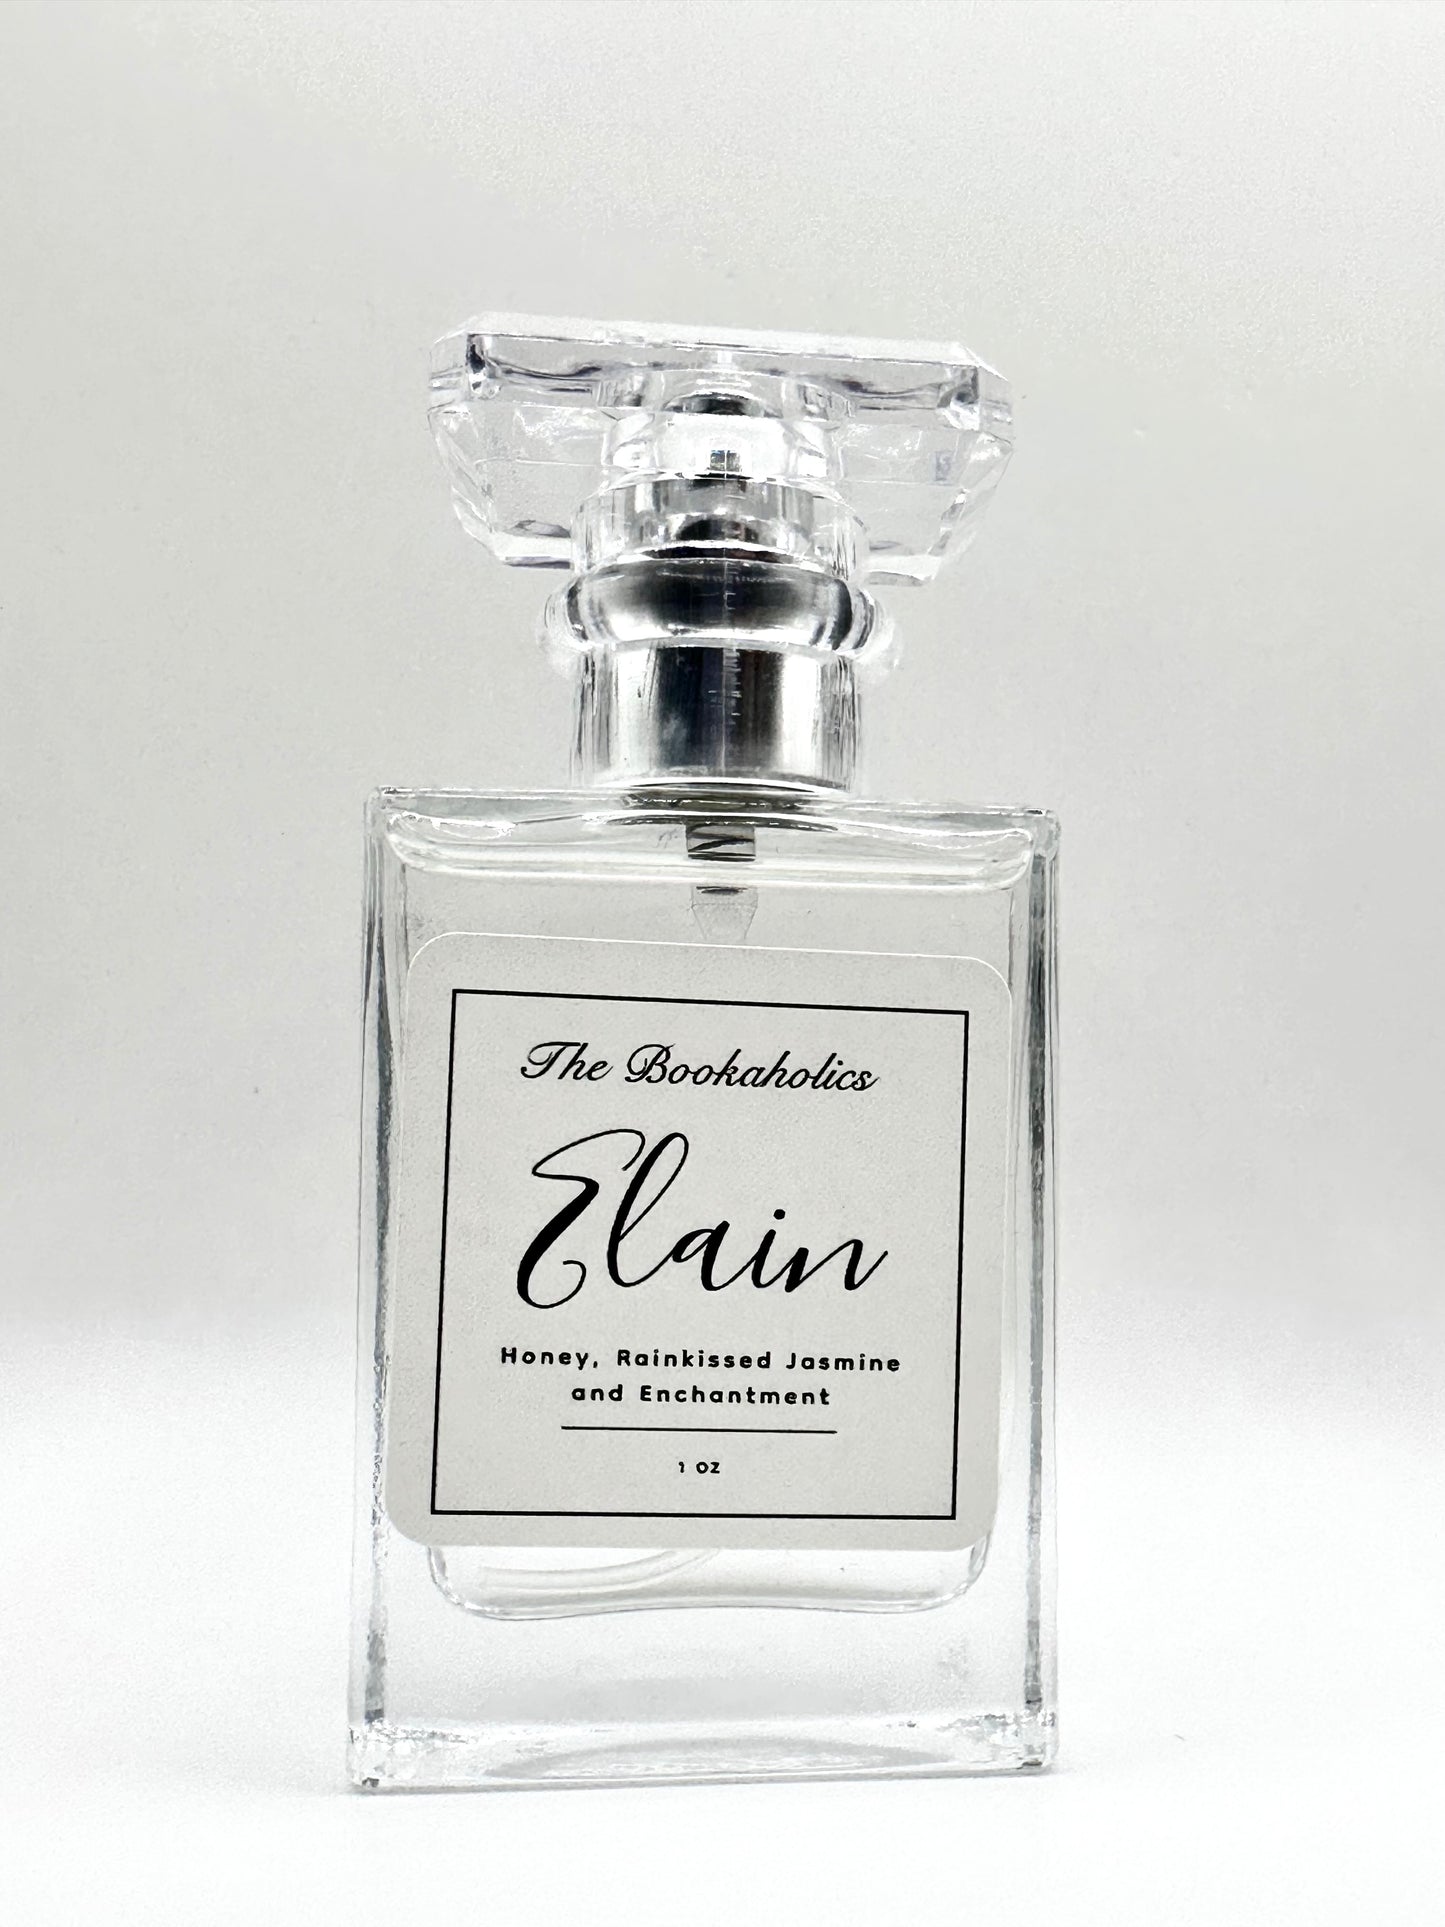 Elain: Perfume inspired by Elain from A Court of Thorns and Roses